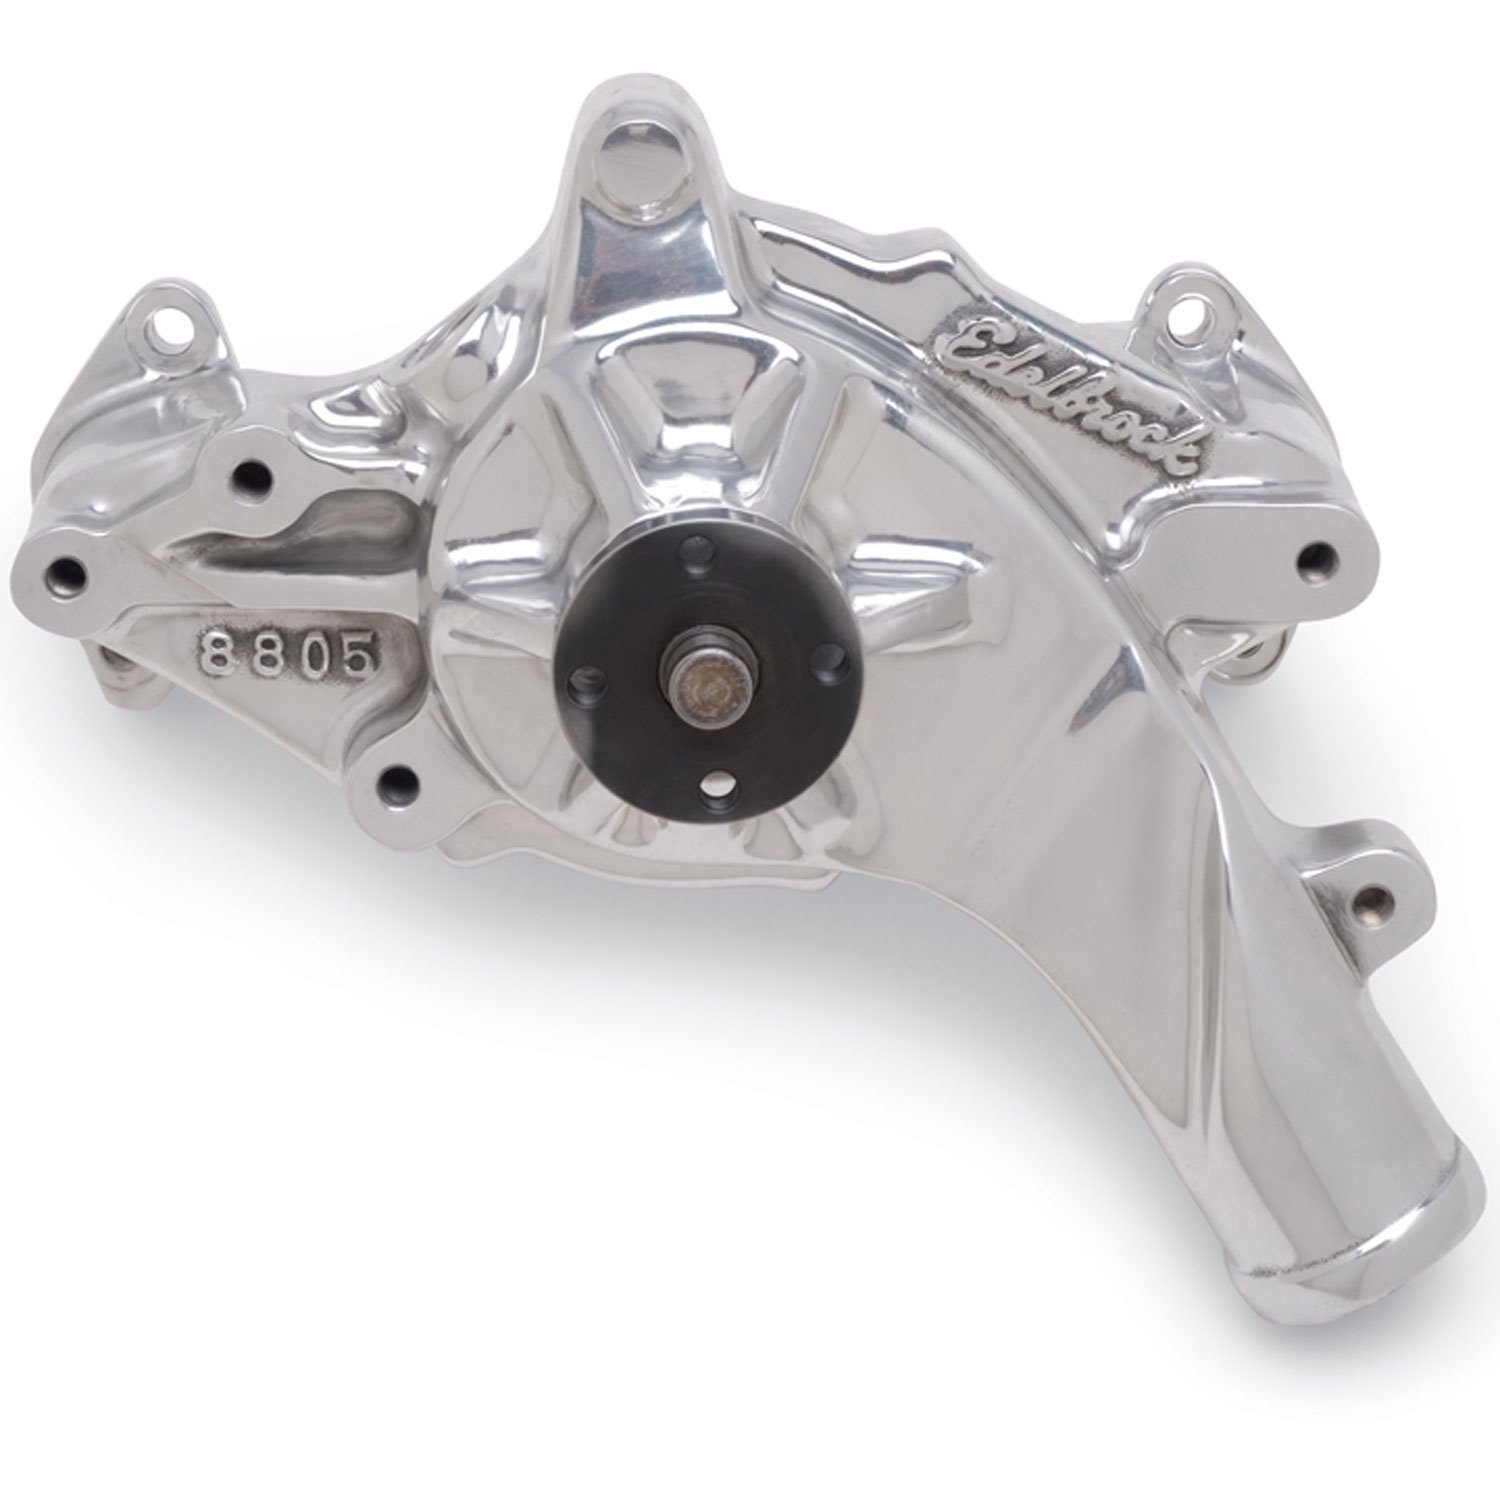 Victor Series Polished Aluminum Water Pump for 1965-1976 Ford FE Engines